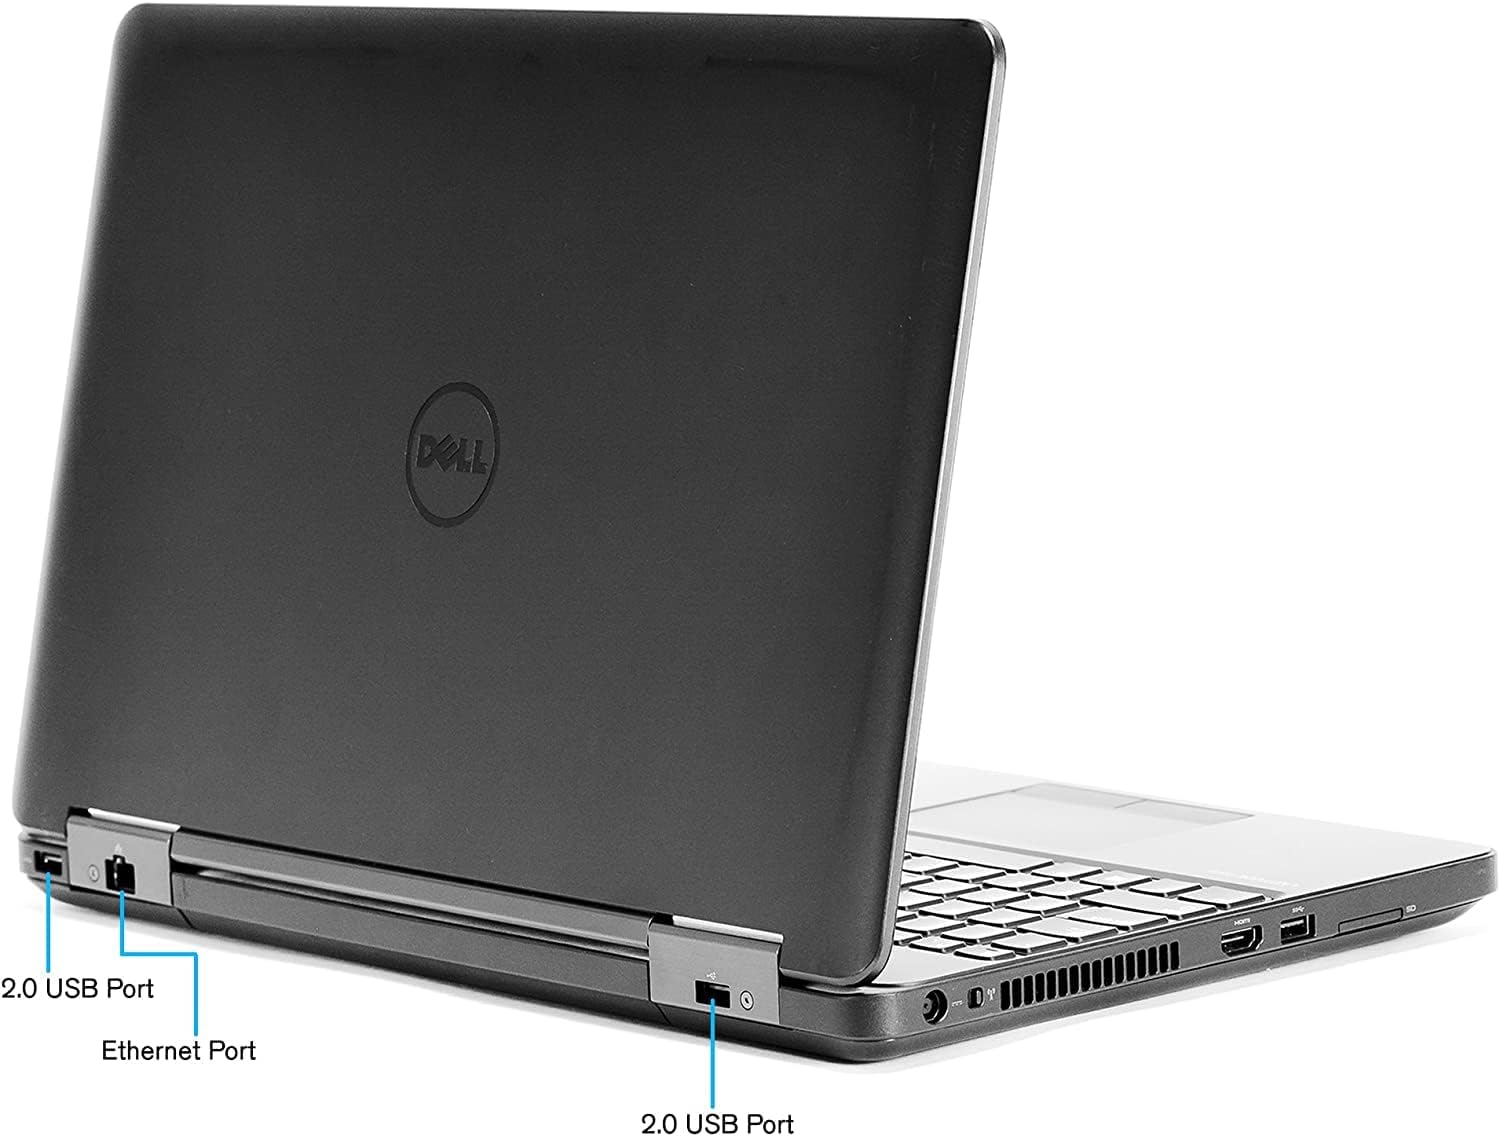 Refurbished Dell Latitude E5540 Laptop Computer, Intel Core i5, 16GB Ram, 256GB Solid State Drive, Windows 11 Operating System, 1 Year Warranty